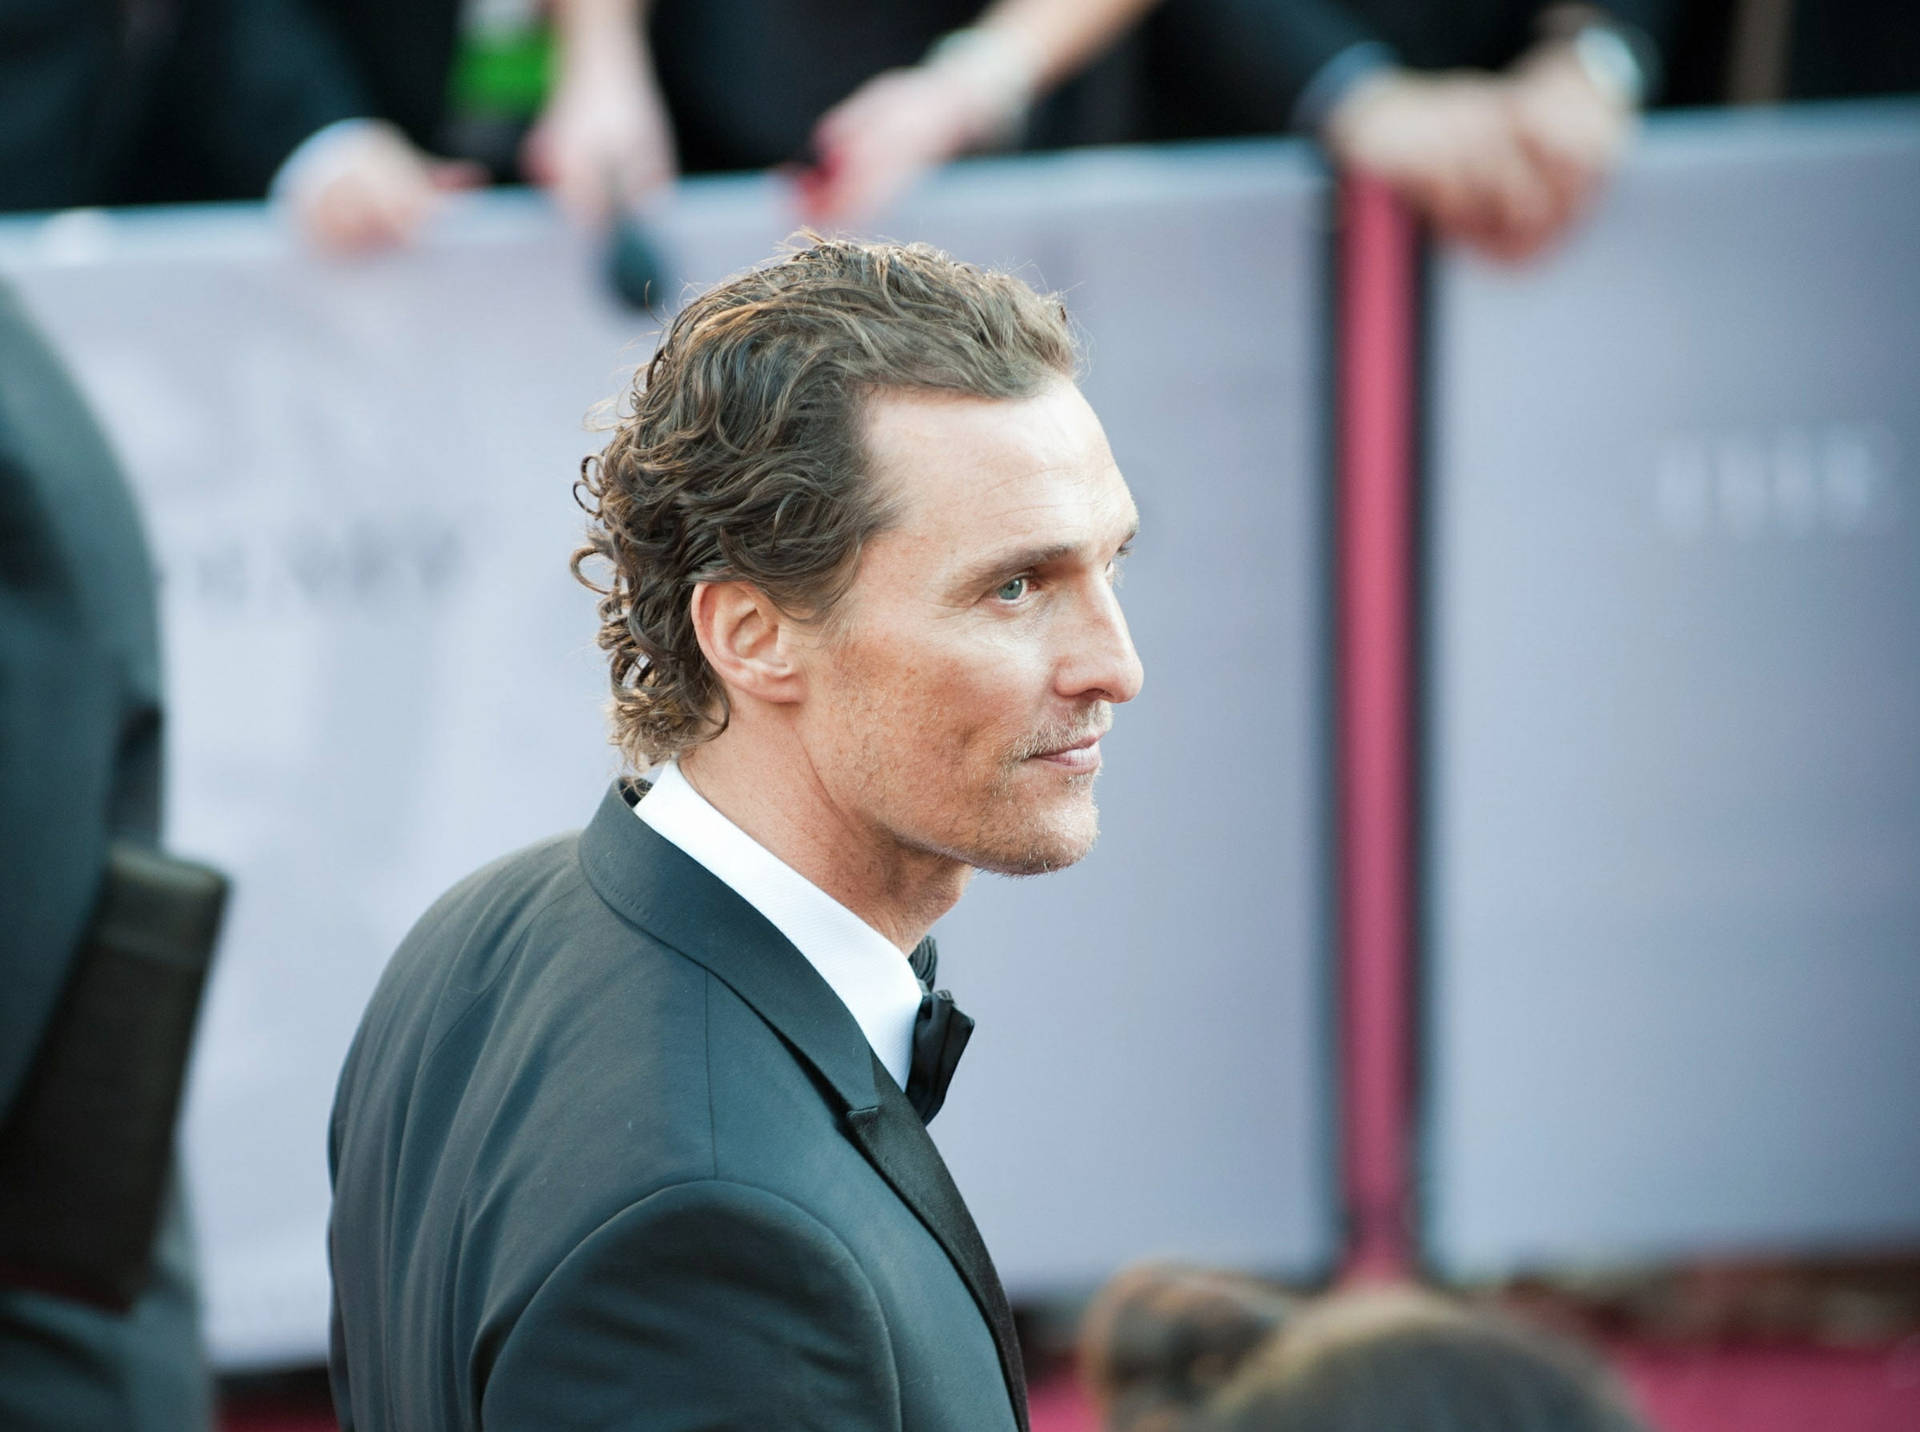 Hollywood Star Matthew Mcconaughey On The Red Carpet Background